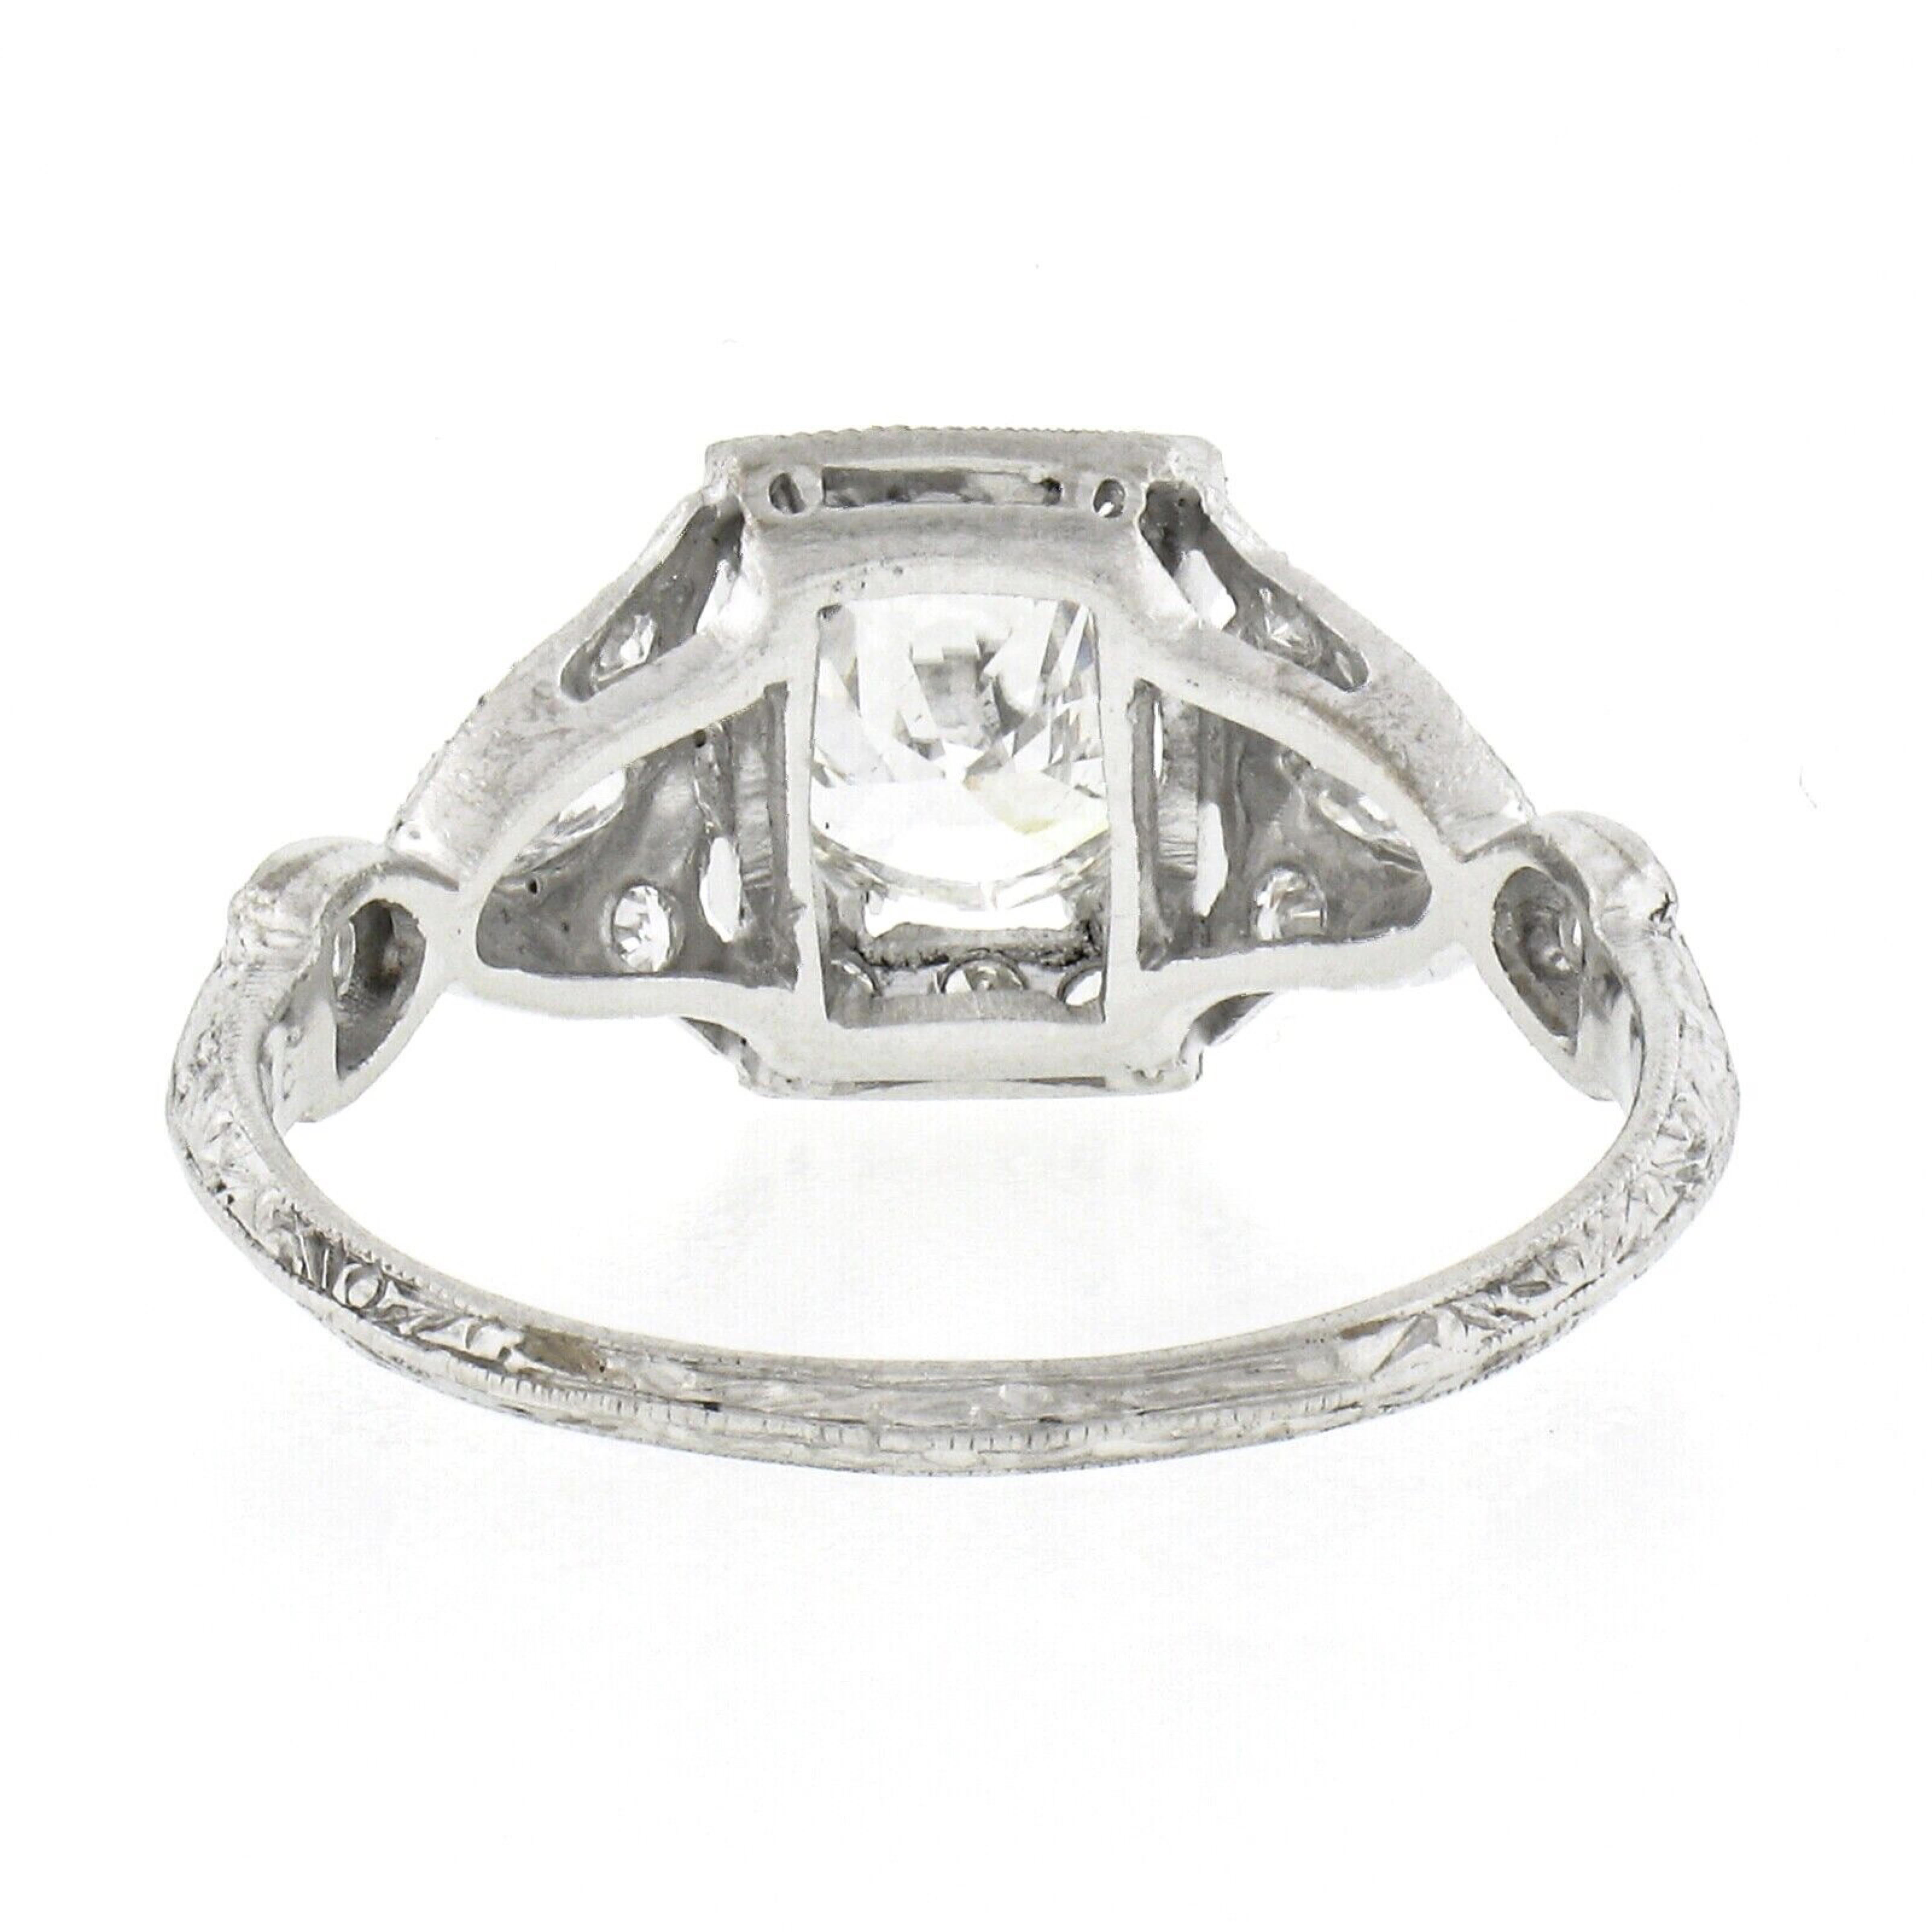 Antique Edwardian Platinum 1.49ct GIA European Diamond Tulip Sides Engraved Ring In Good Condition For Sale In Montclair, NJ